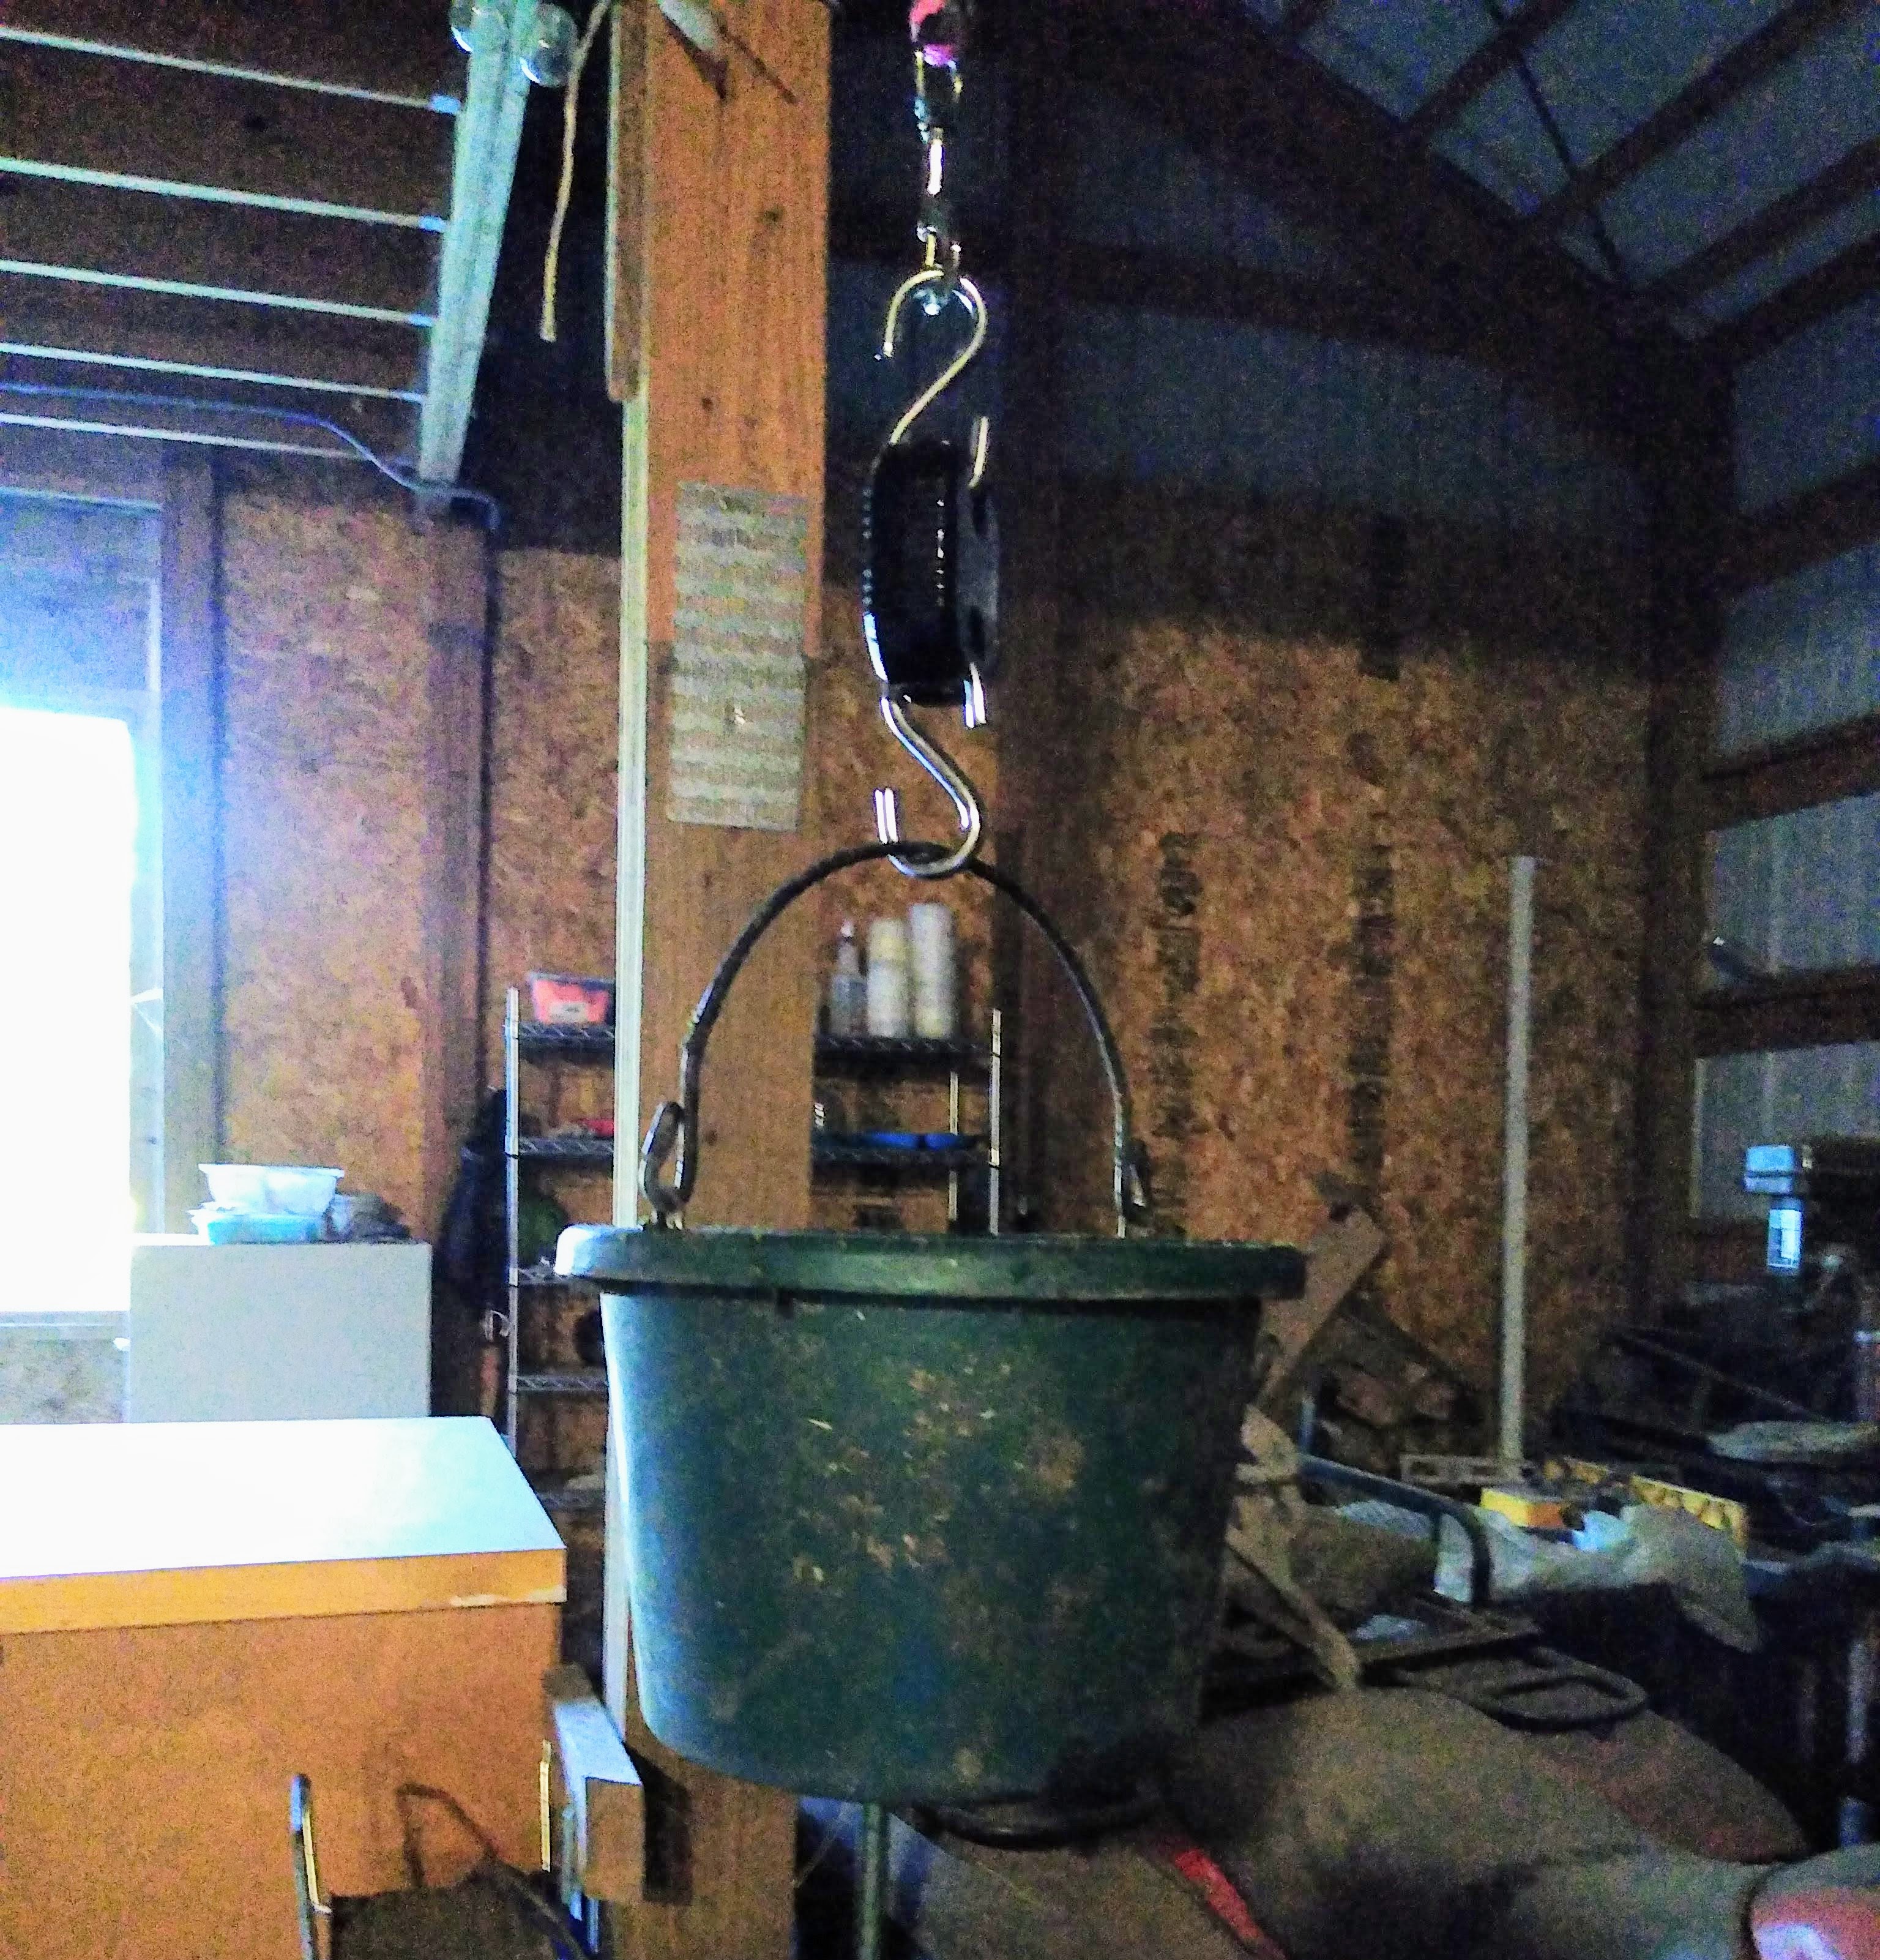 A bucket of horse feed hanging from a scale.